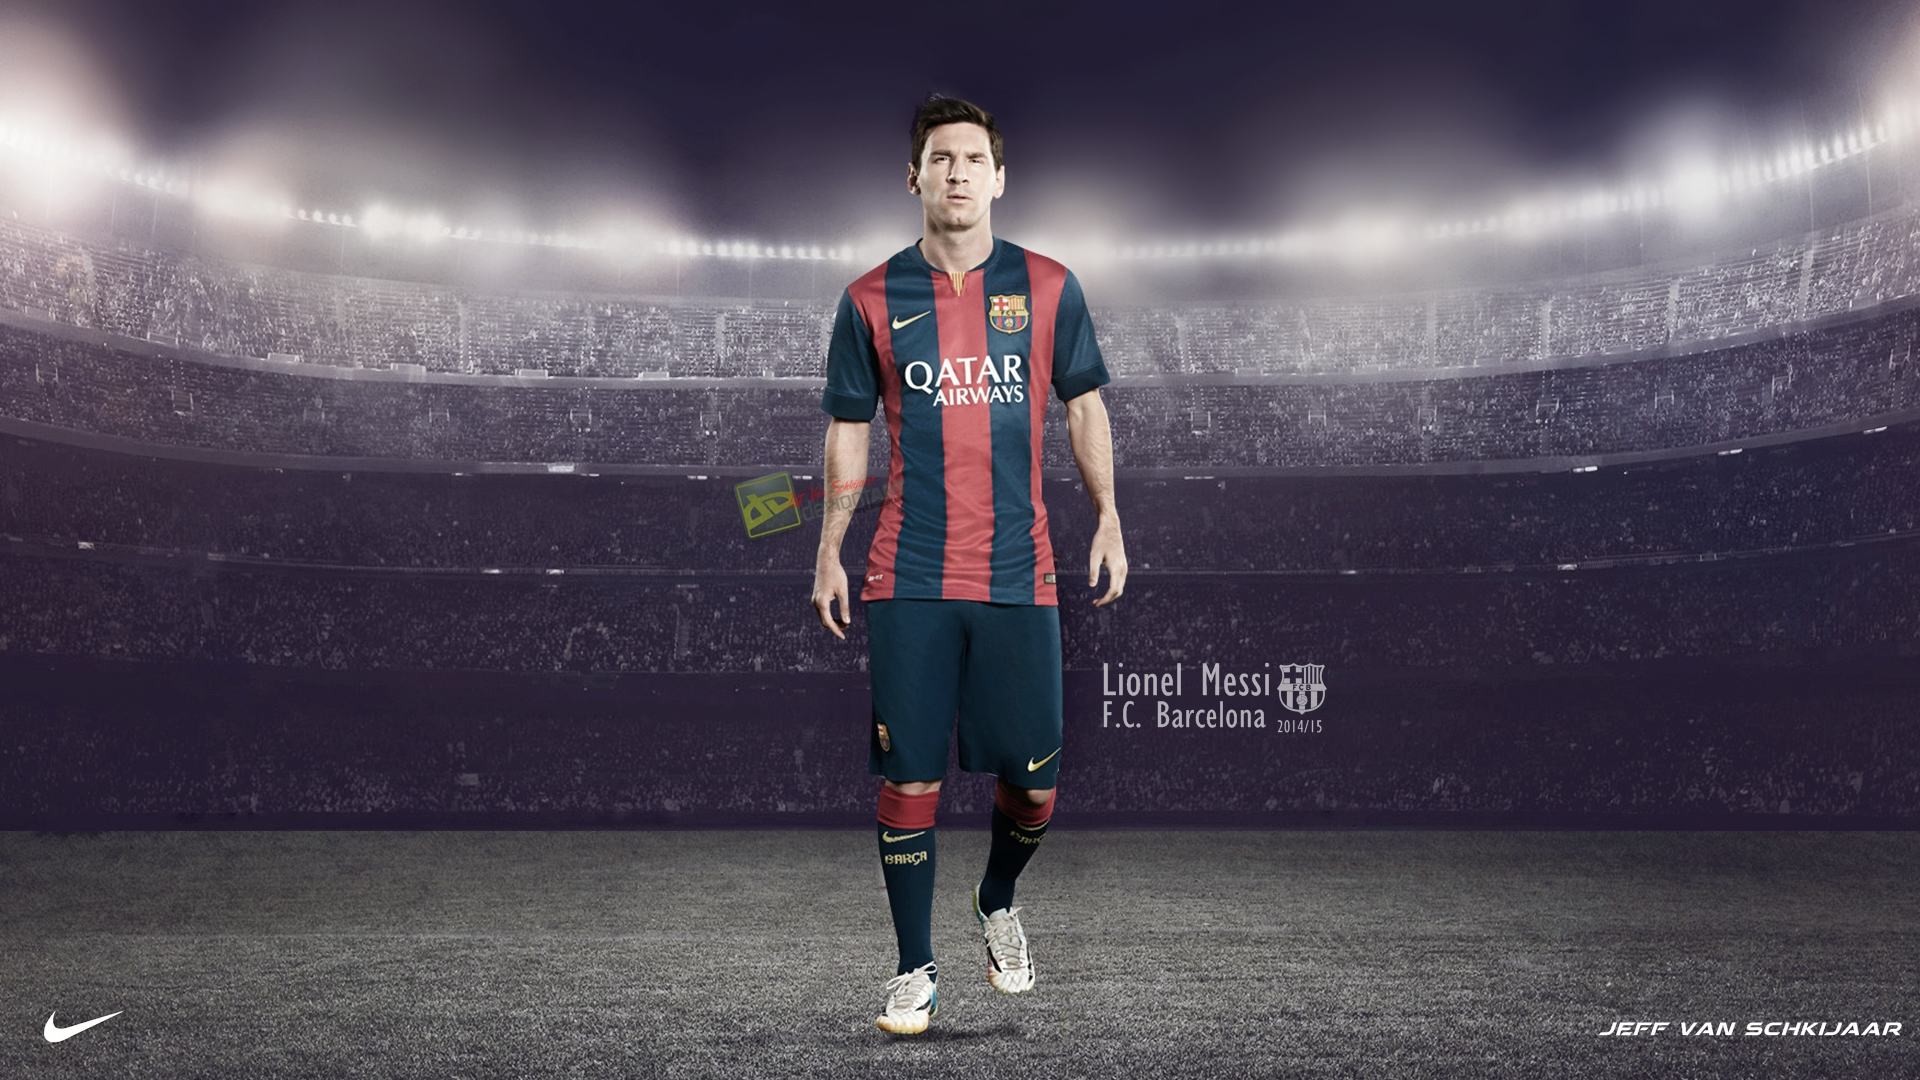 Lionel Messi Wallpapers for Mobile Download